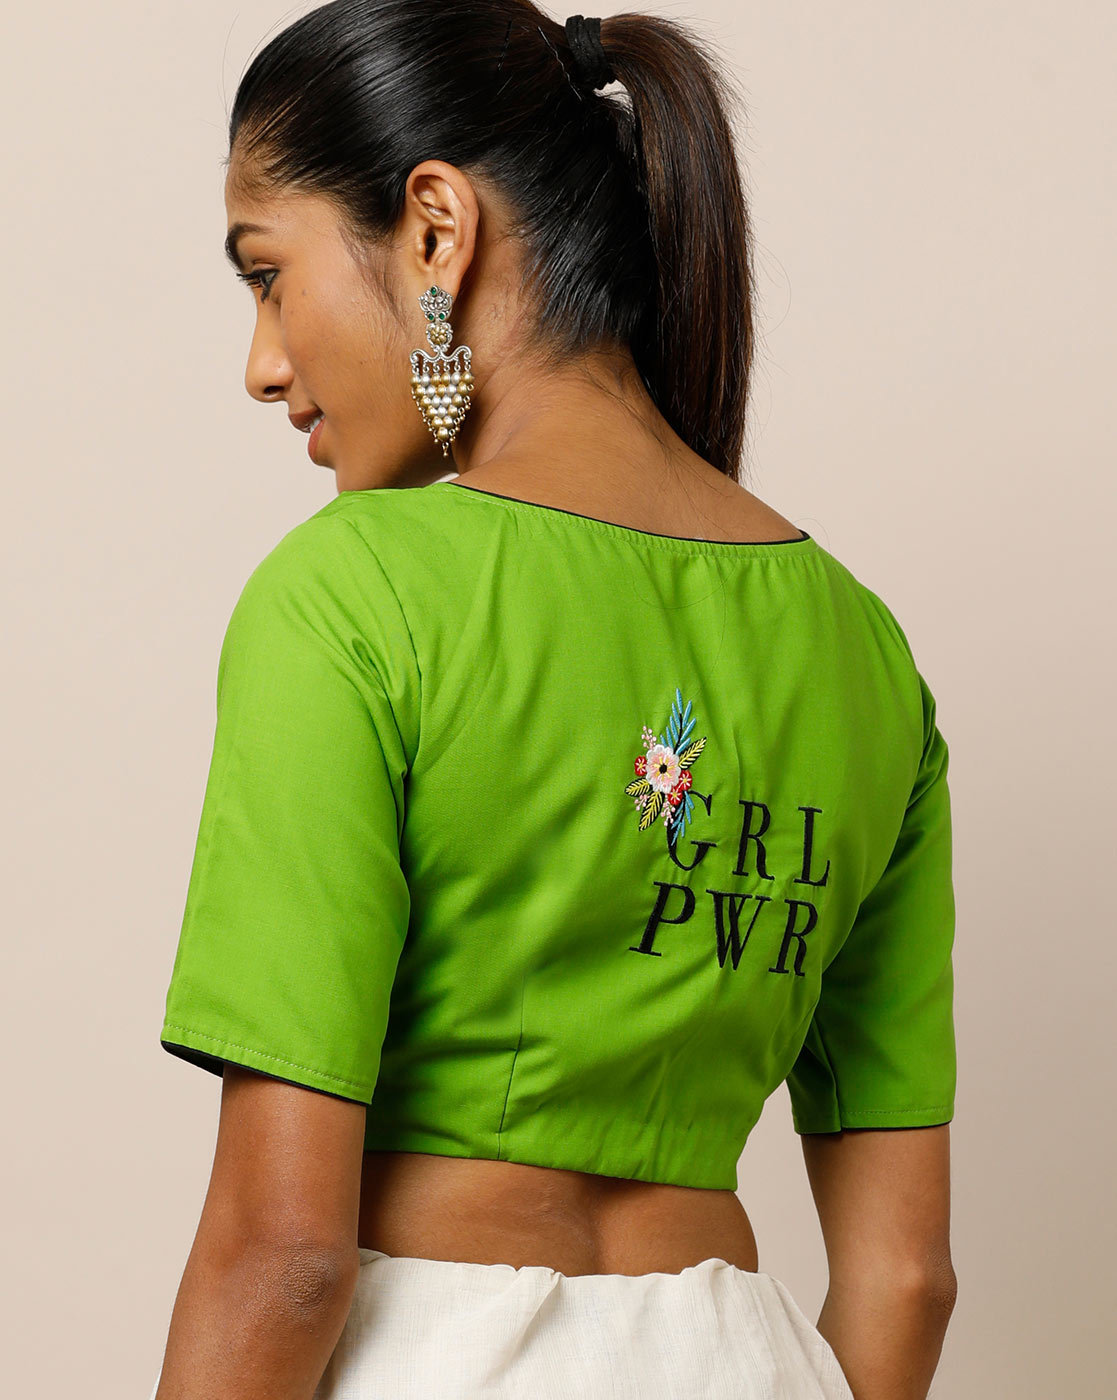 blouse-back-with-embroidery-designs-2019 (9)